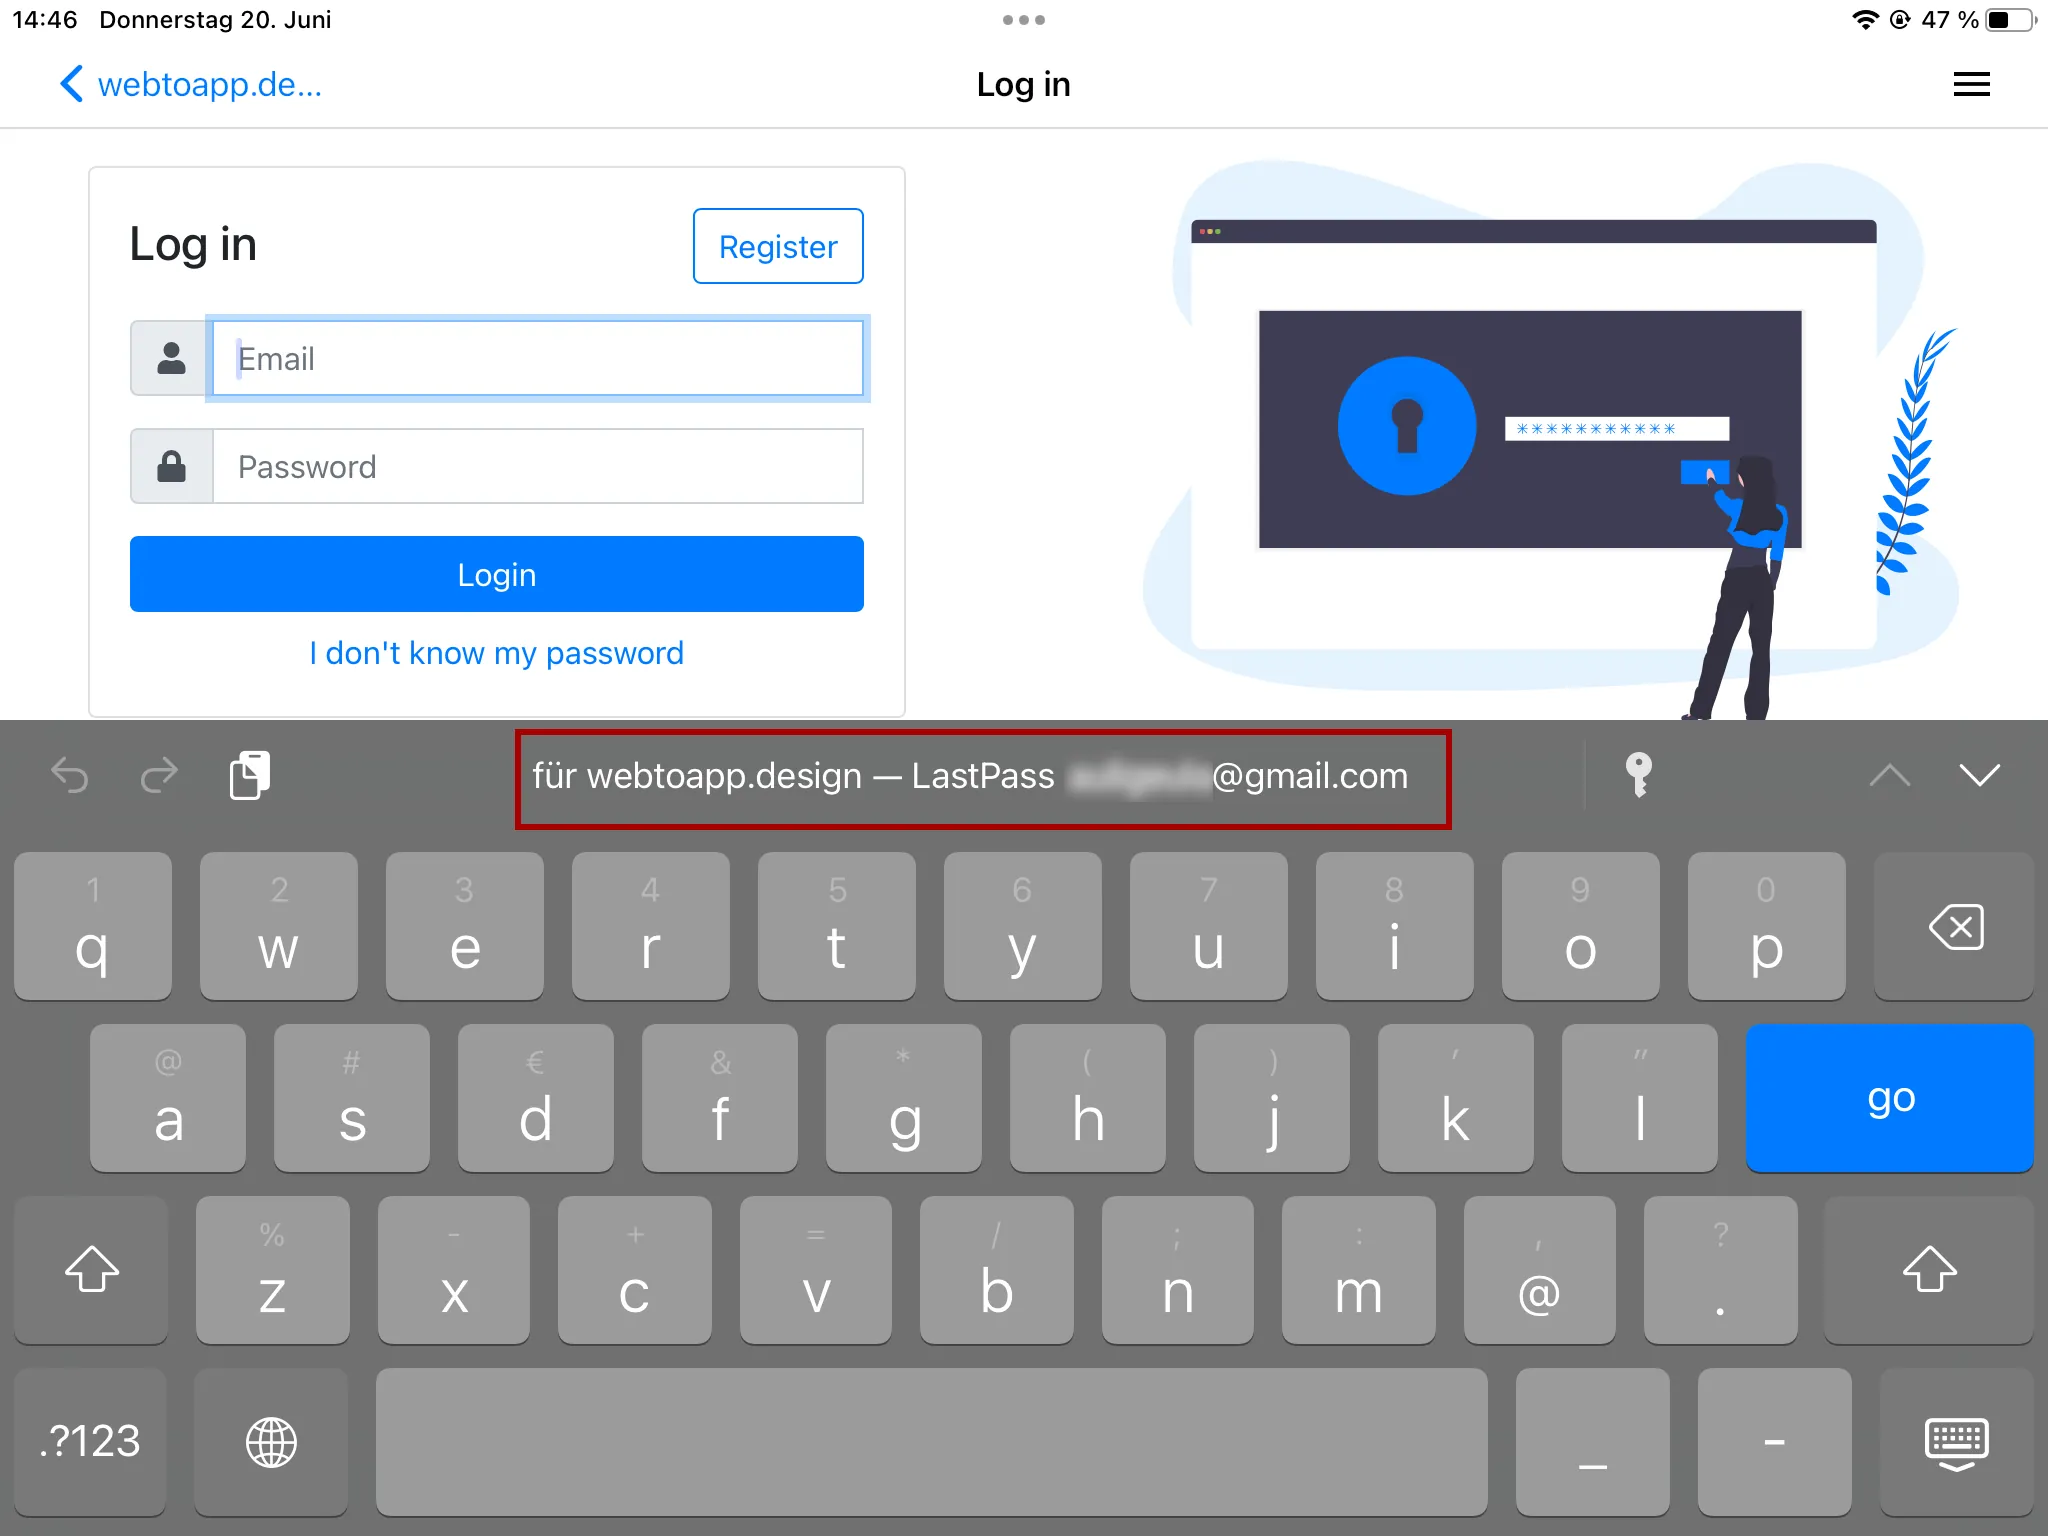 A screenshot of the iOS keyboard offering to automatically fill out the login details saved for the webtoapp.design app using LastPass.